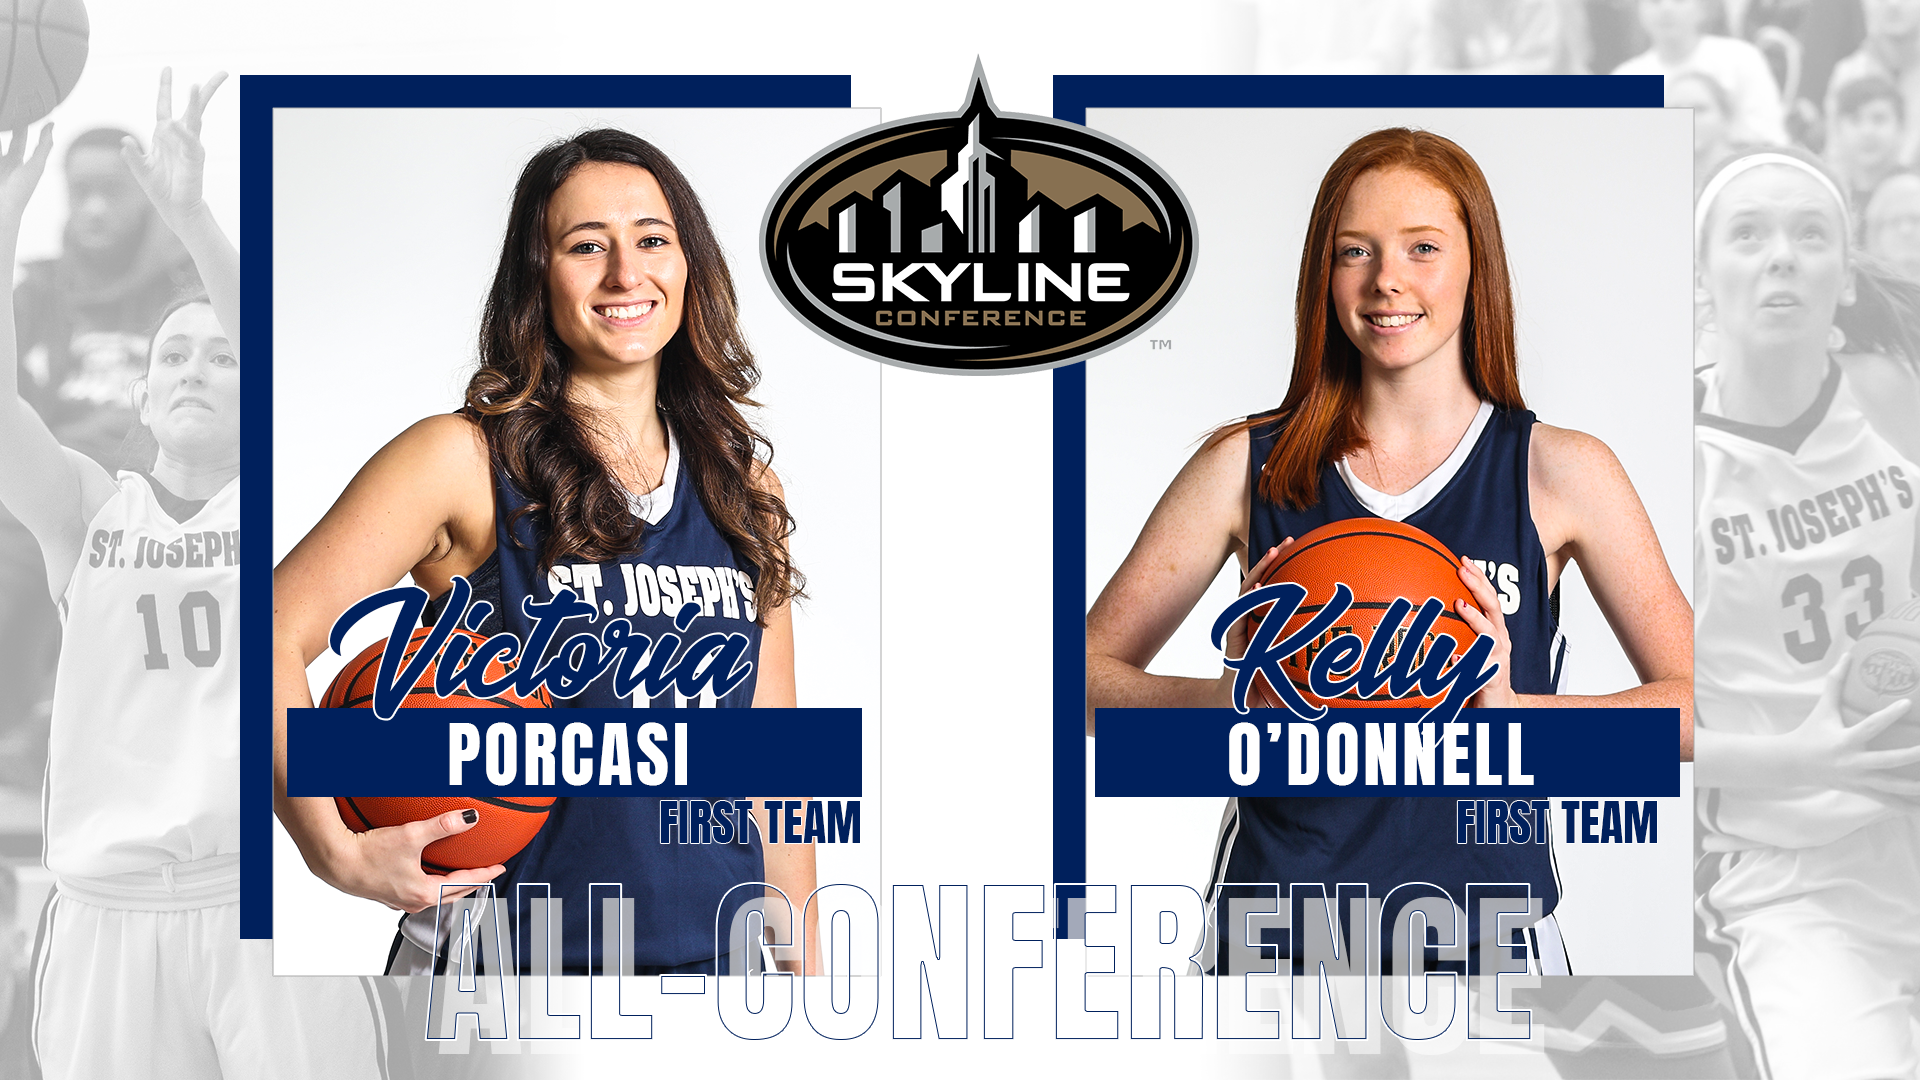 Porcasi and O’Donnell Land on All-Skyline Women’s Basketball First Team